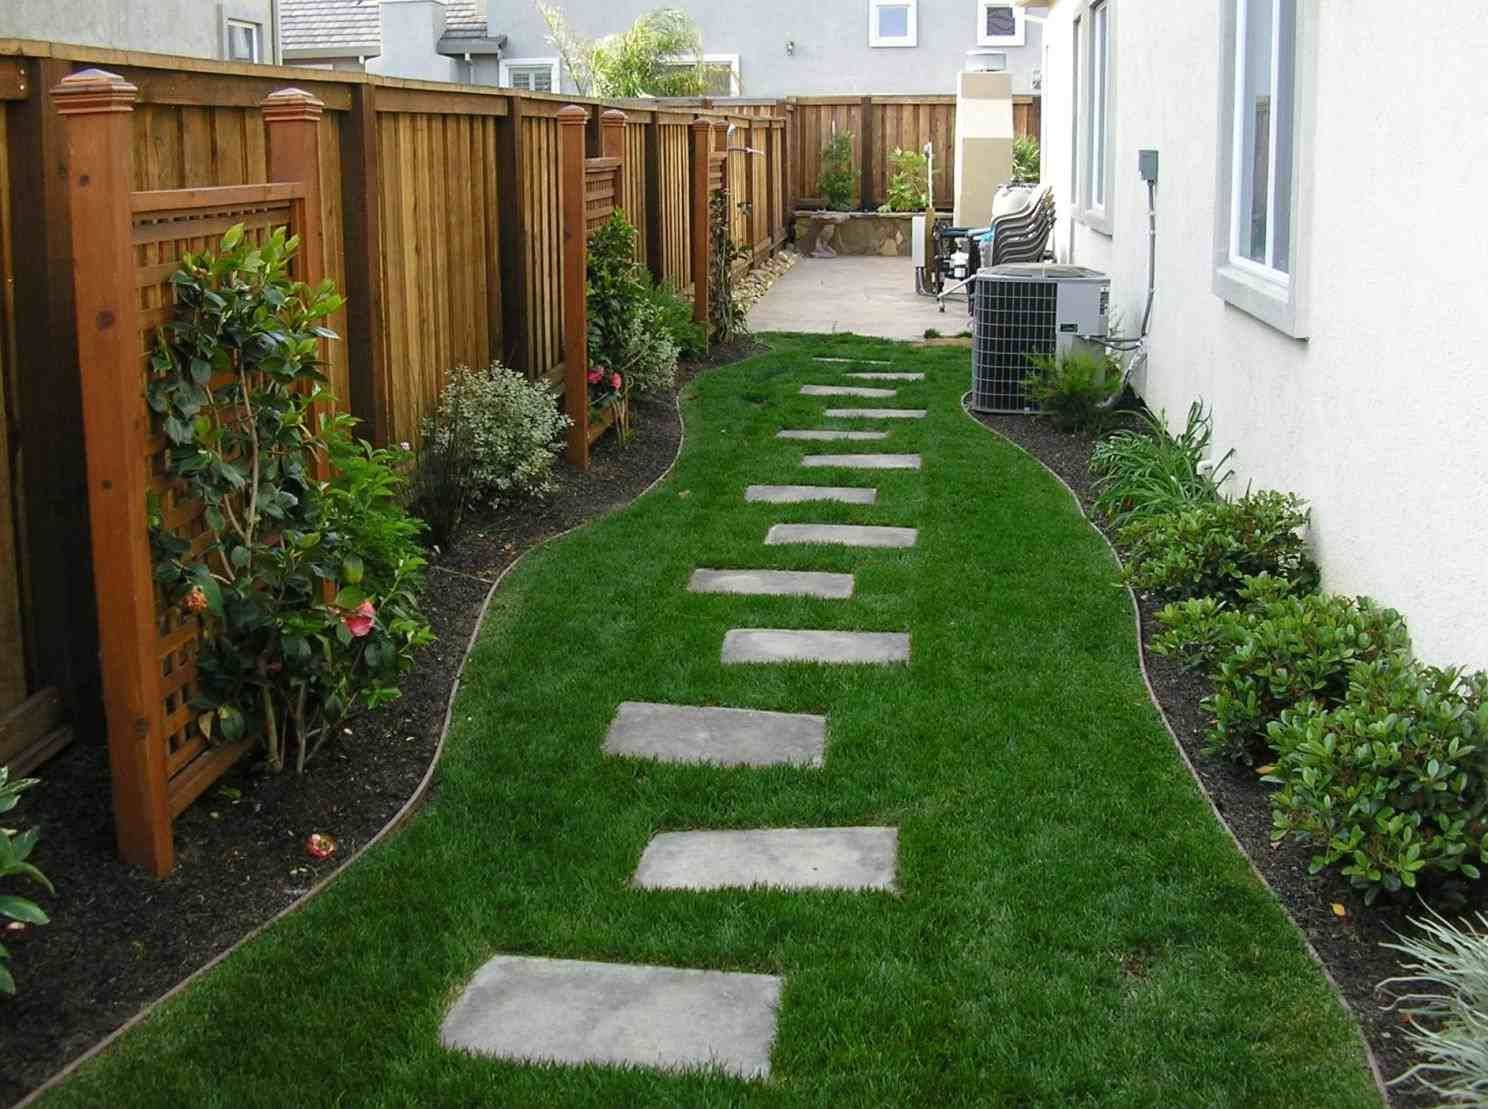 Creative Ways to Utilize Narrow Side Yards Between Houses